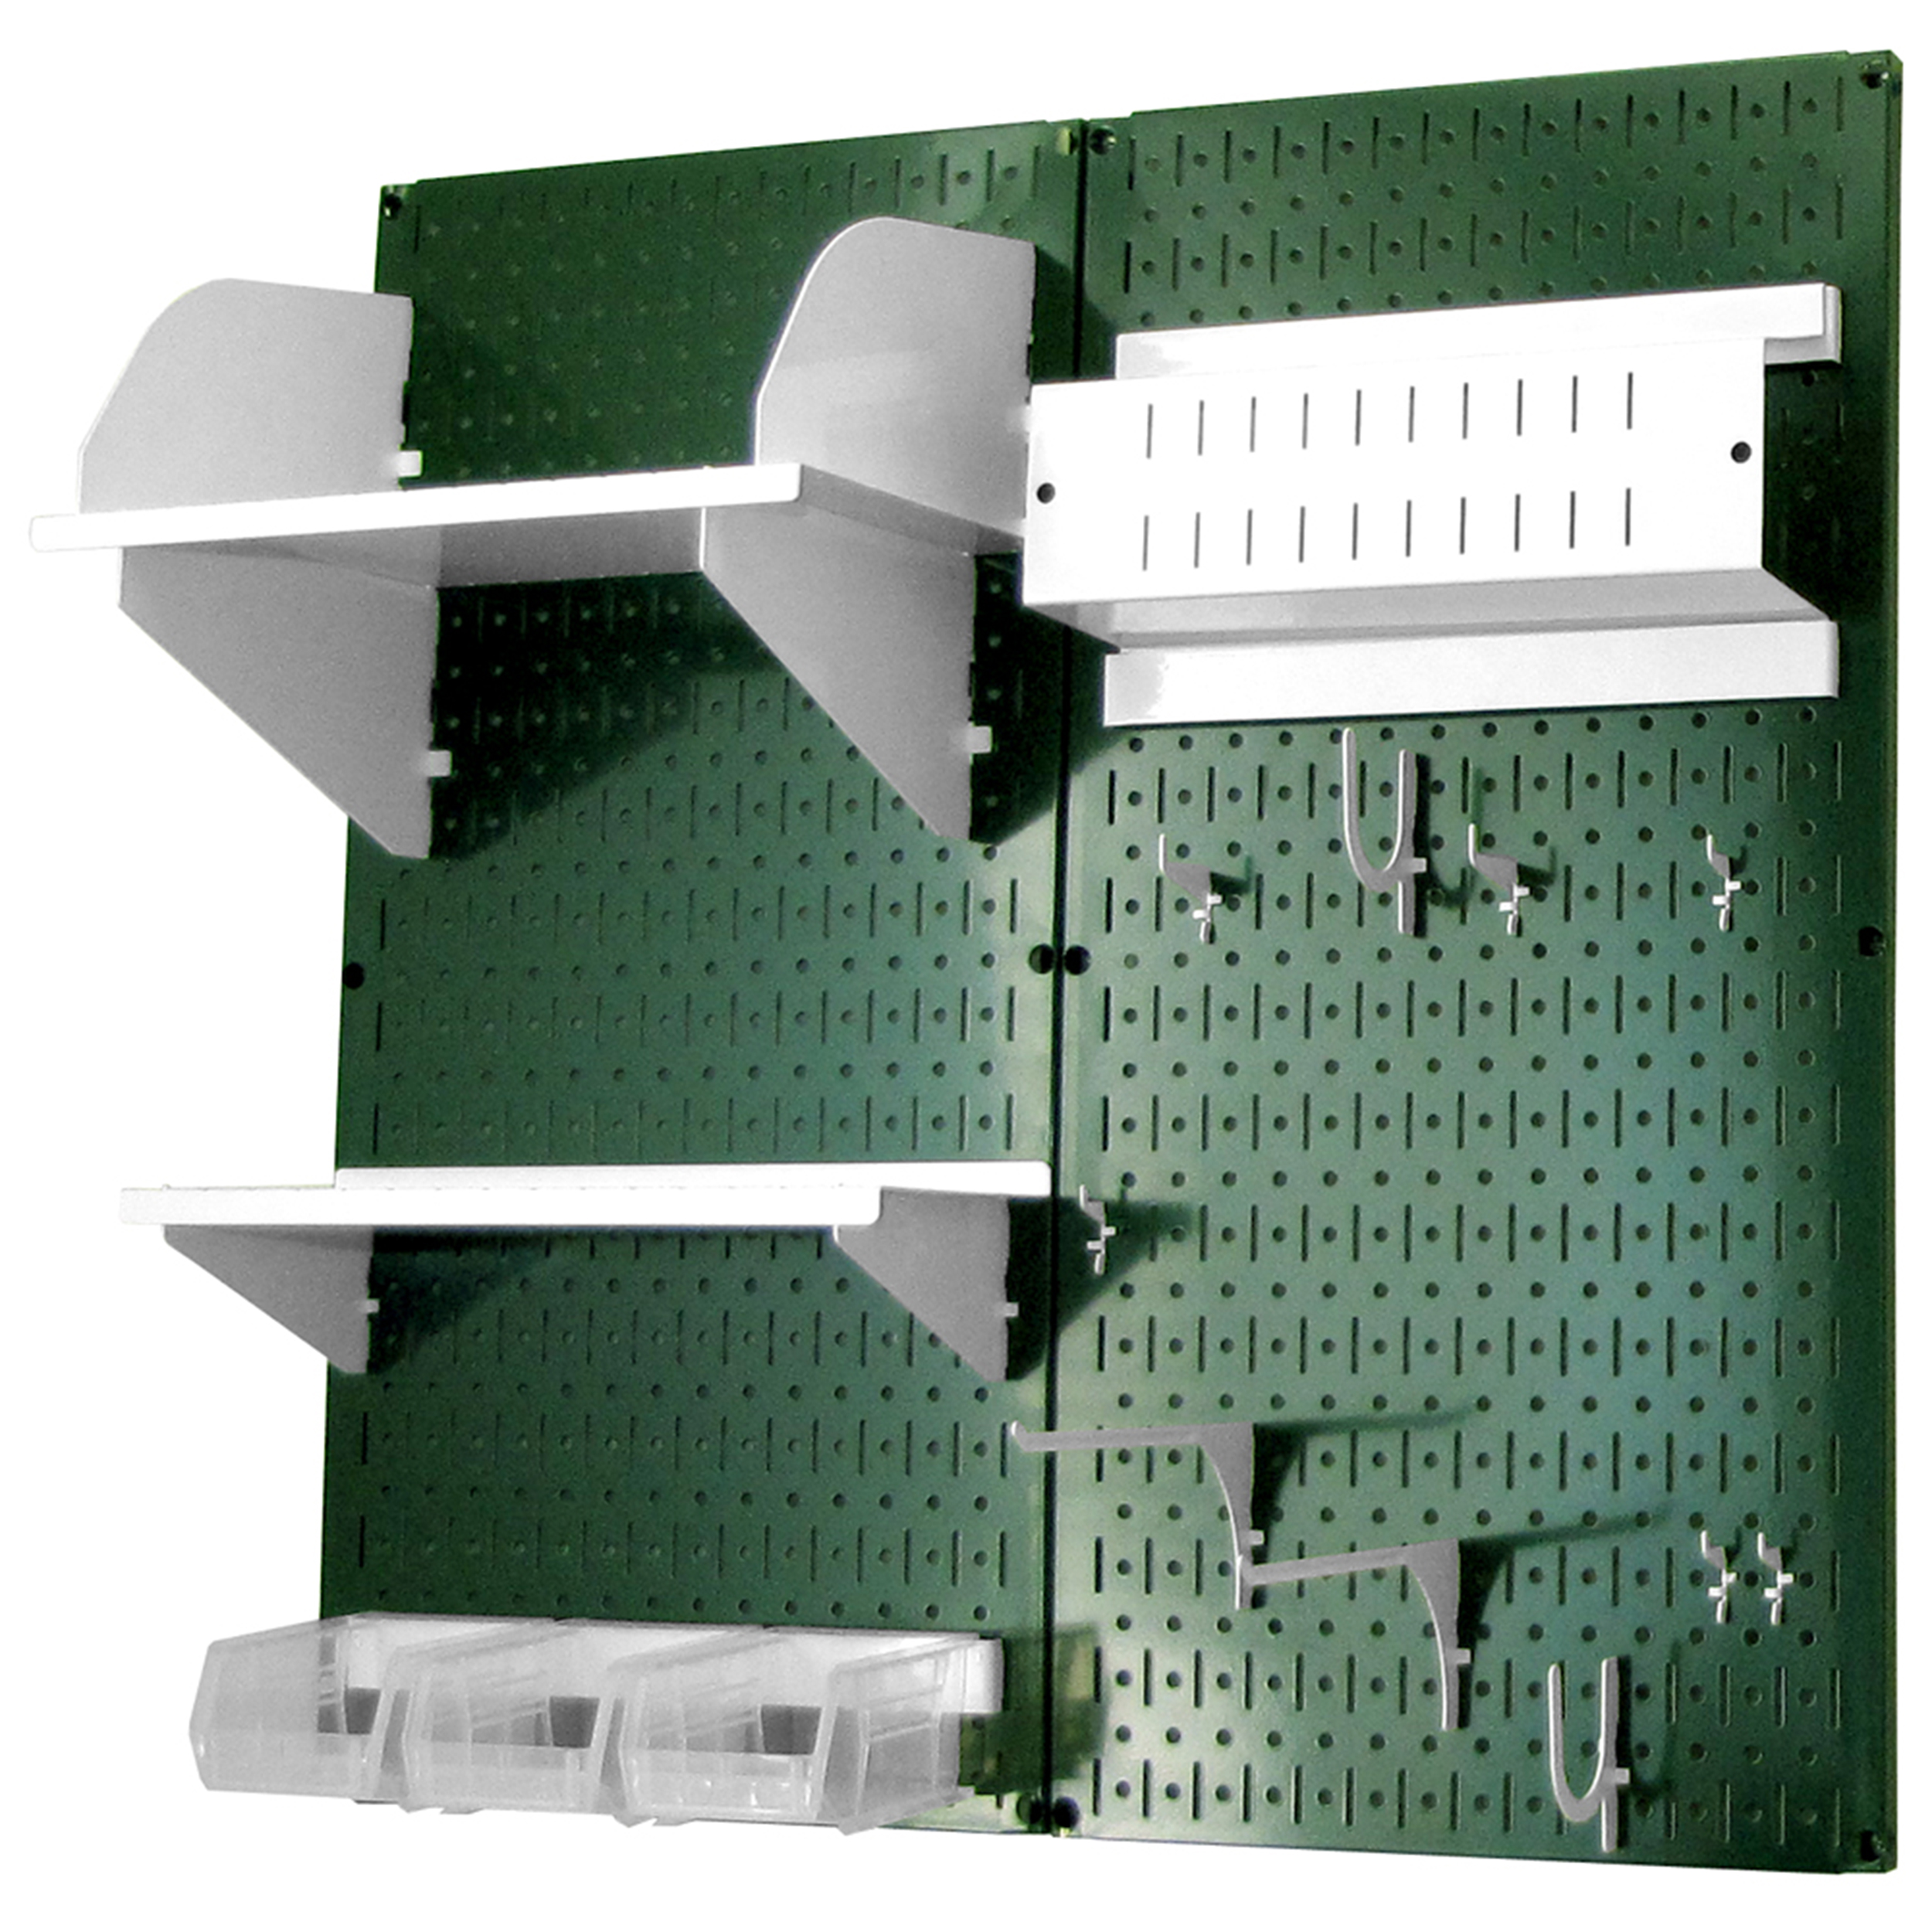 Pegboard Hobby Craft Pegboard Organizer Storage Kit With Green Pegboard And White Accessories